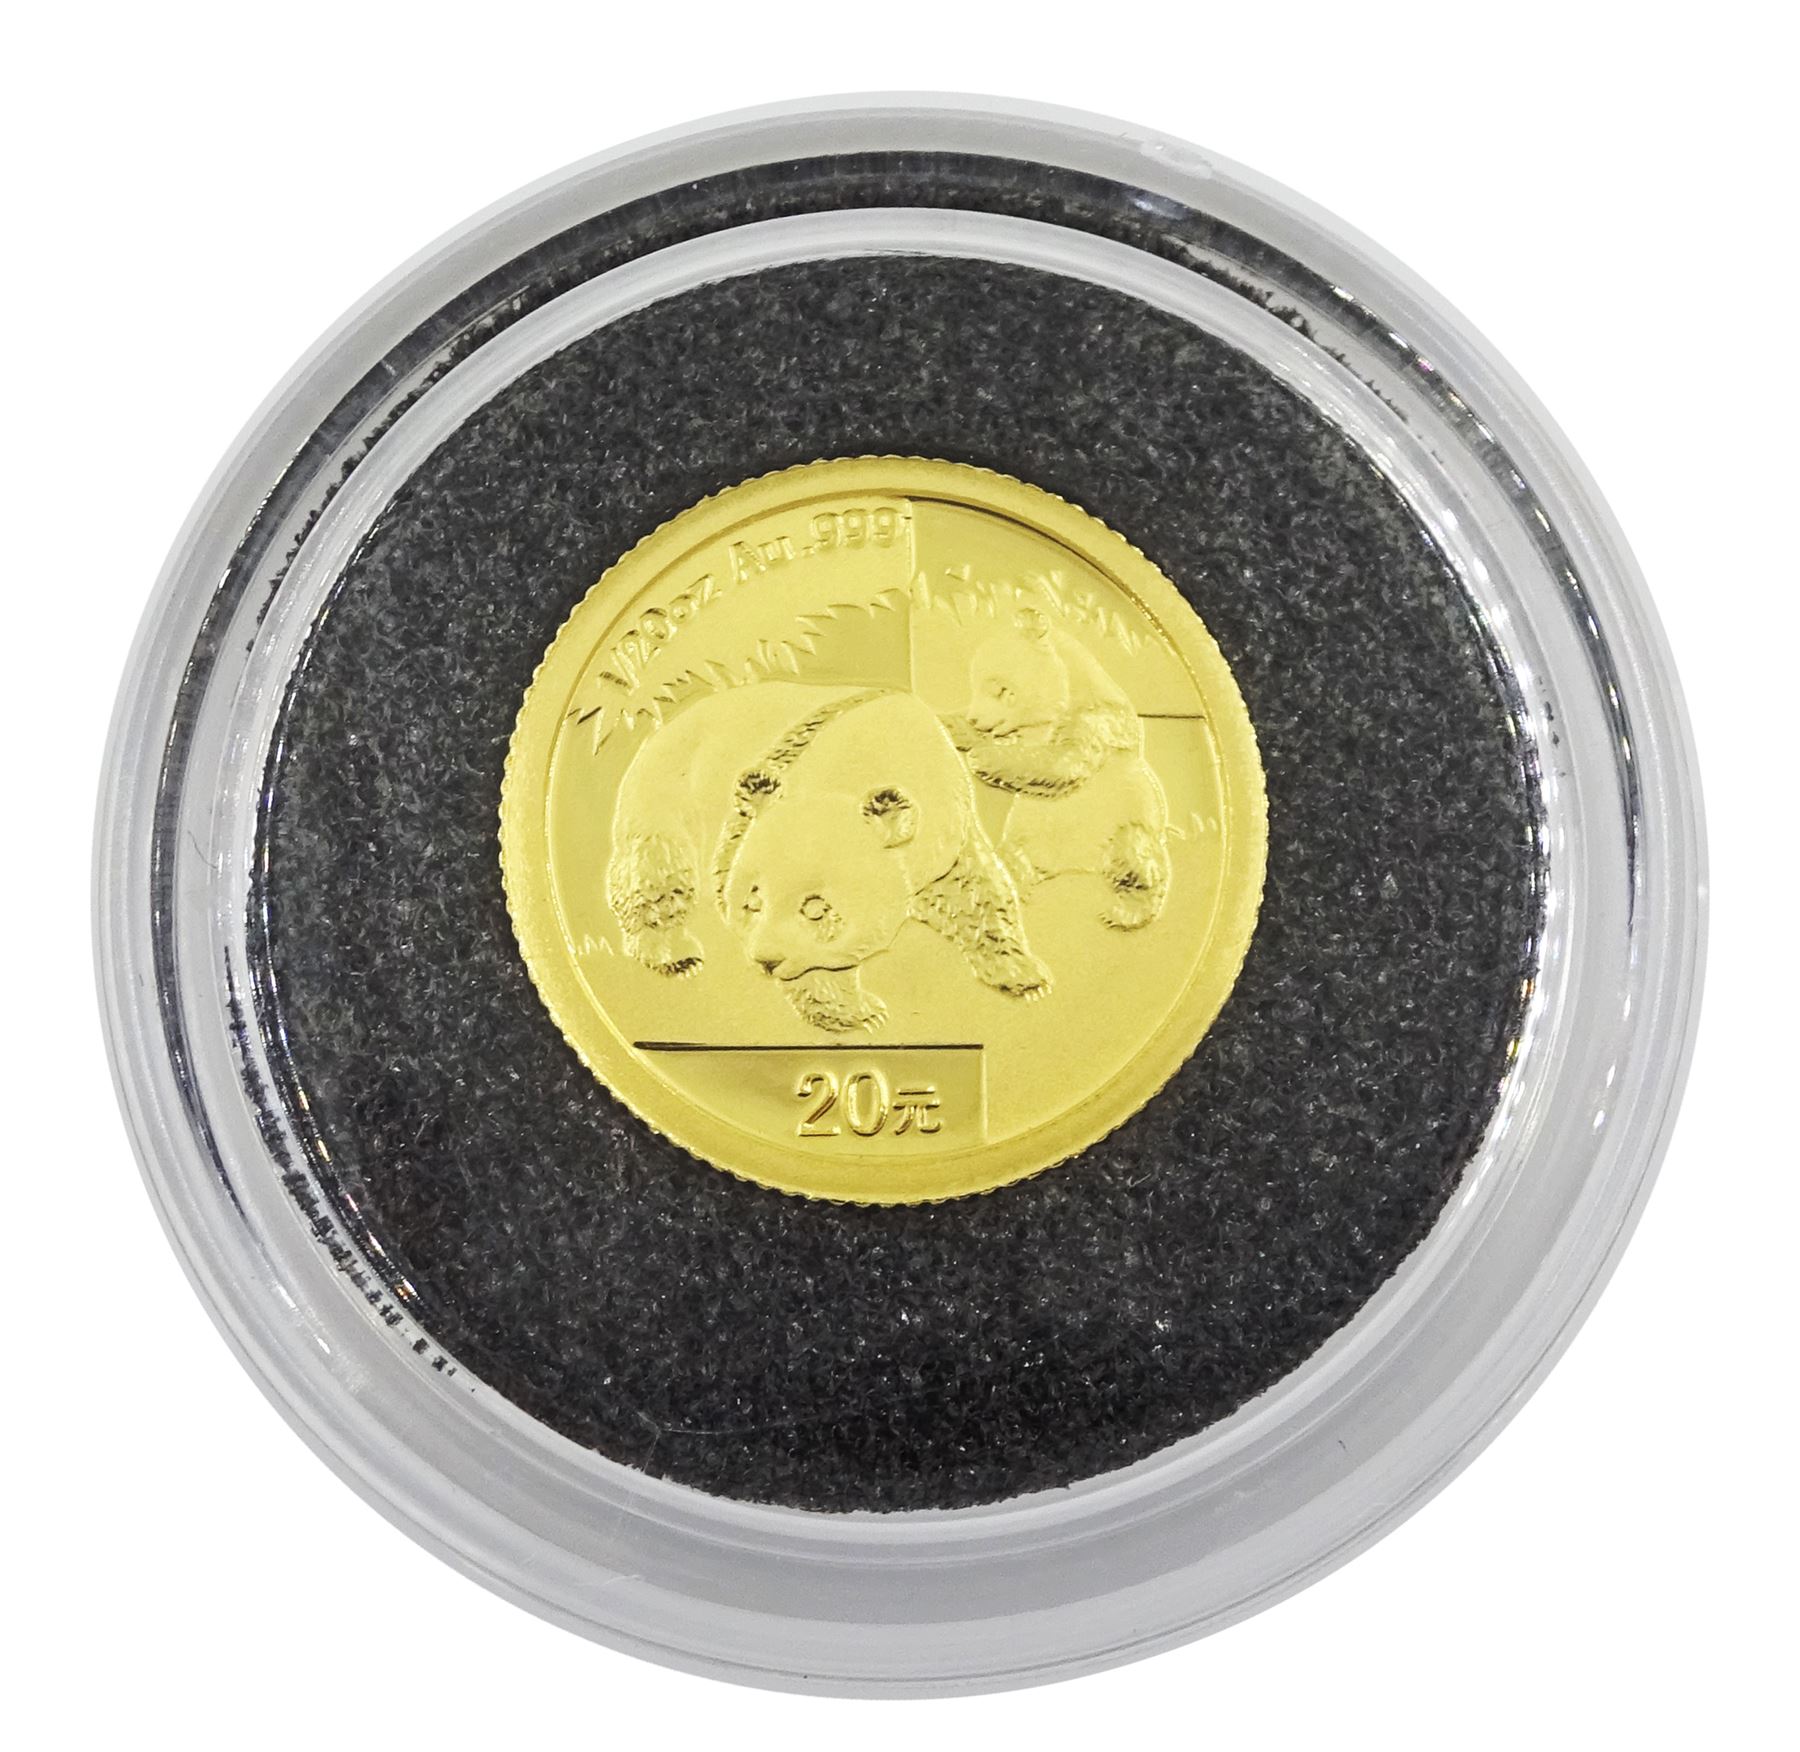 China 2008 one twentieth of an ounce fine gold panda coin